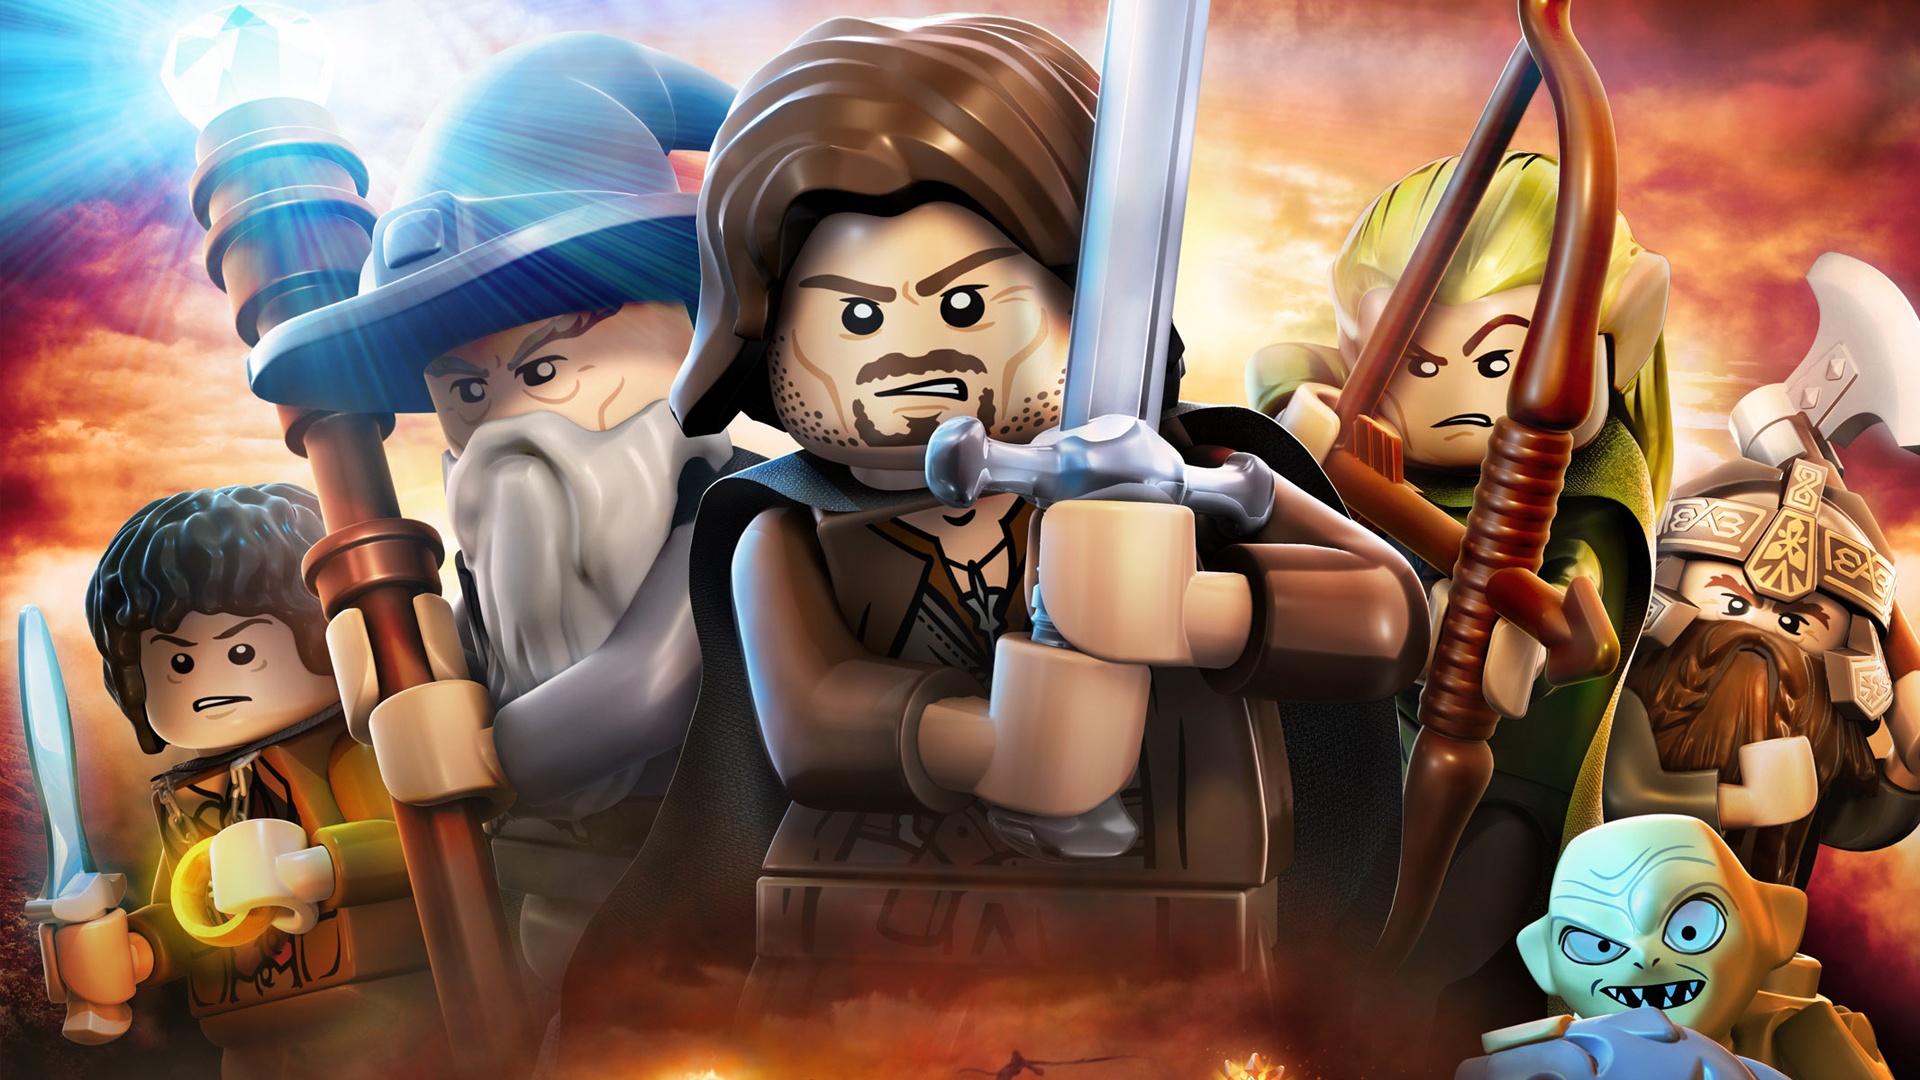 Video Game LEGO The Lord of the Rings HD Wallpaper | Background Image